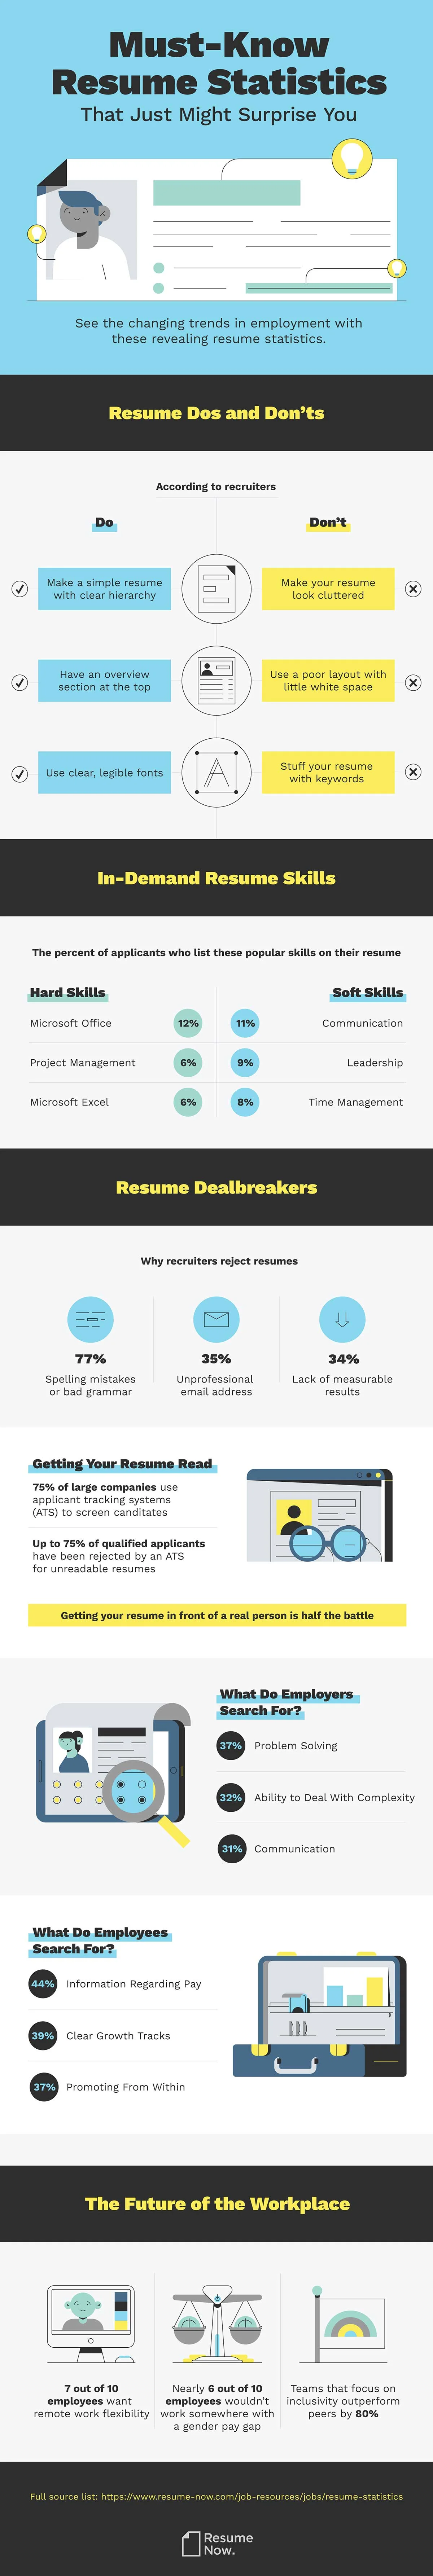 Hiring Trends in 2021 Infographic